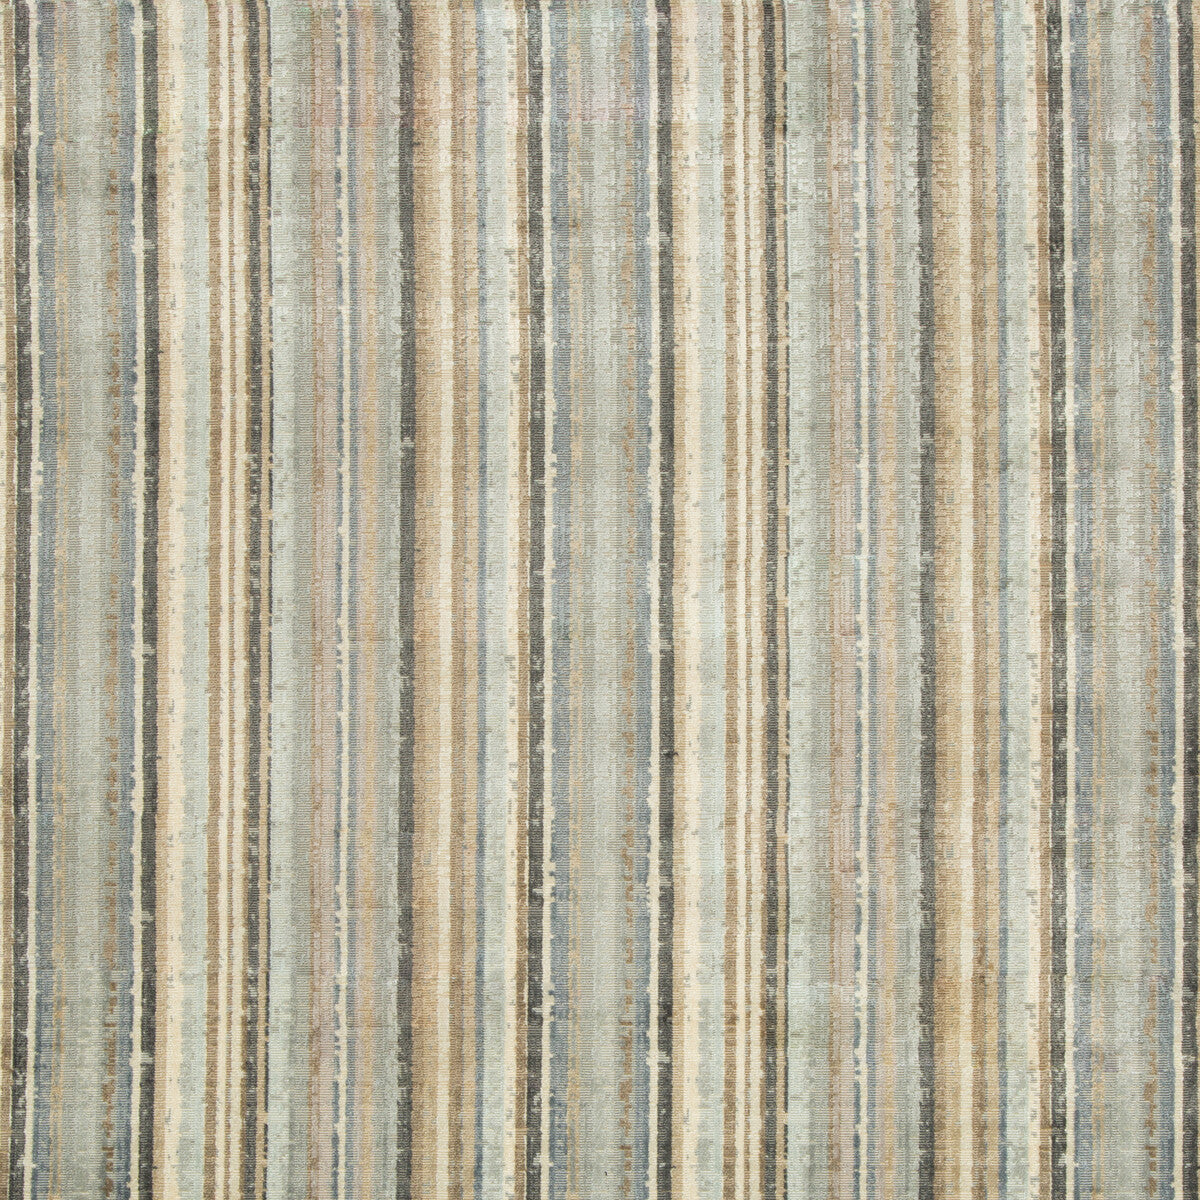 Out Of Bounds fabric in dusk color - pattern 34786.511.0 - by Kravet Couture in the Artisan Velvets collection